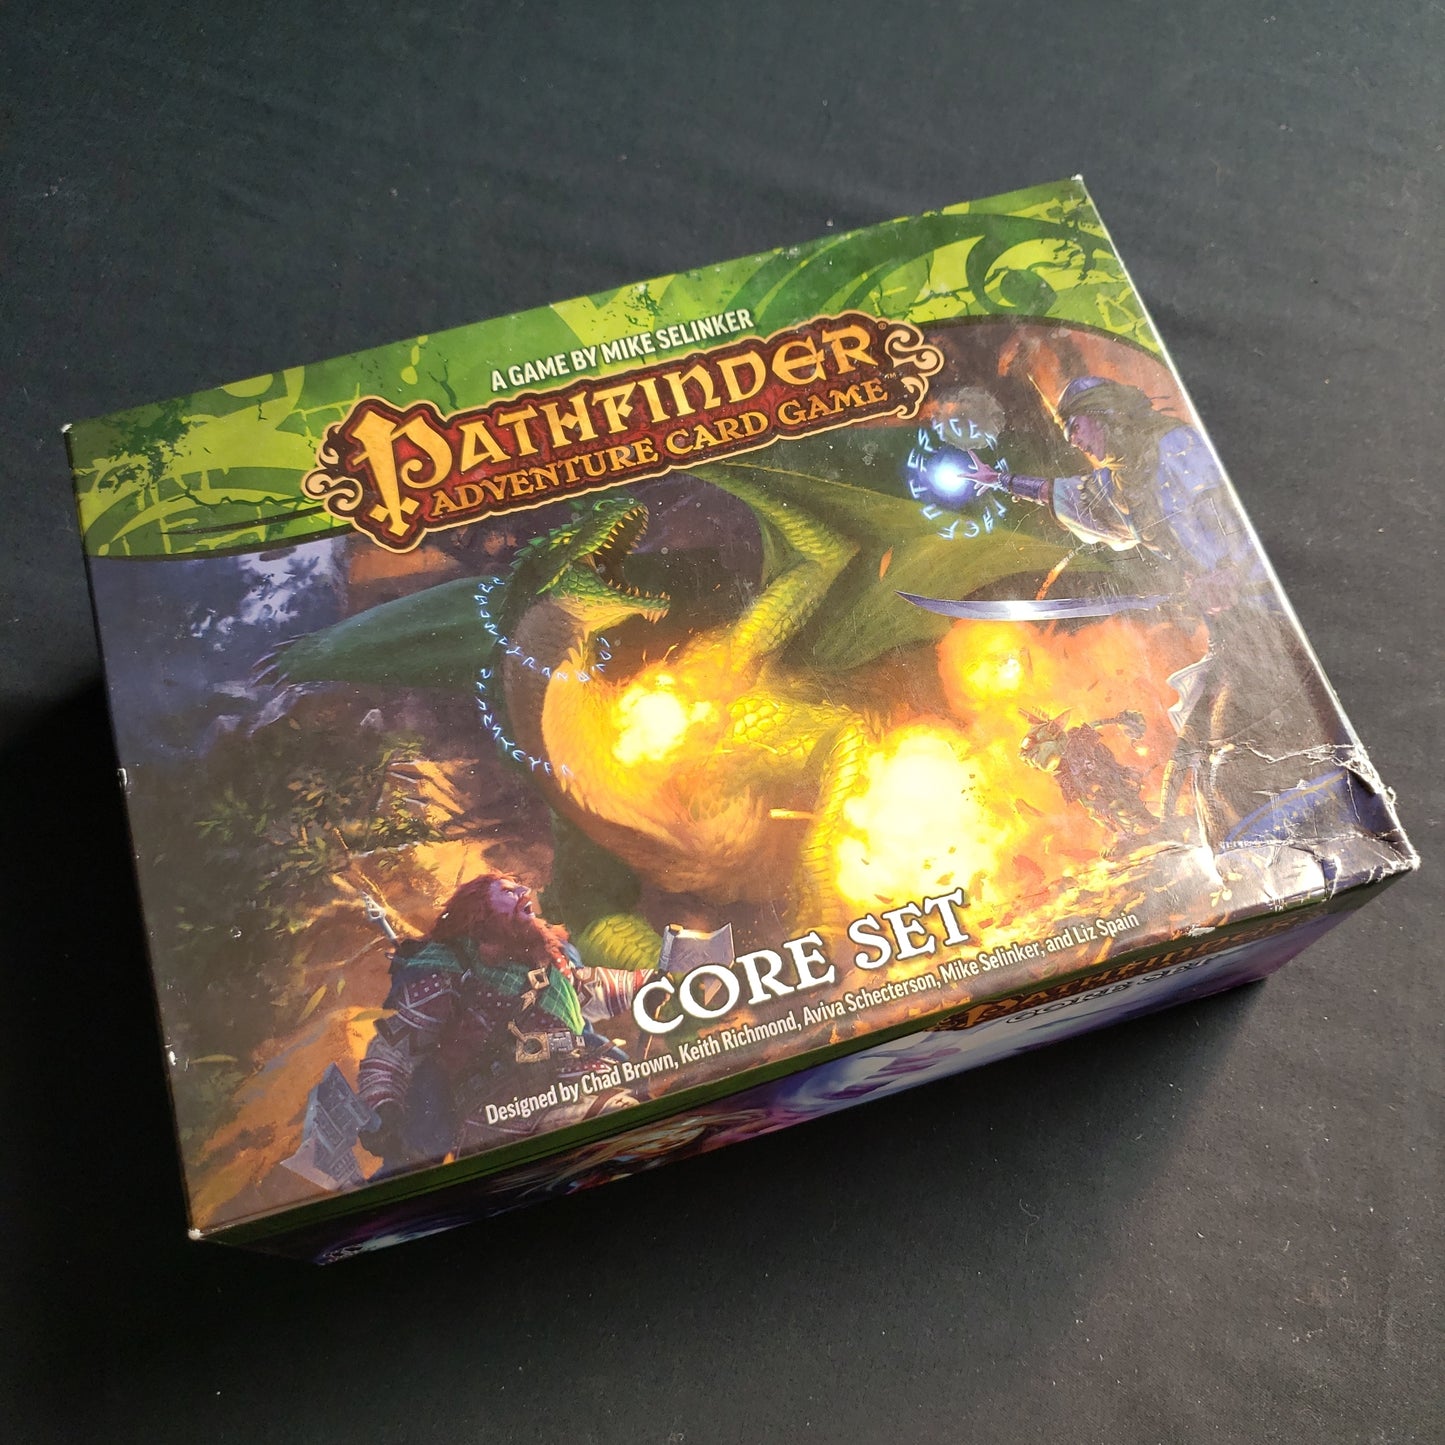 Image shows the front cover of the box of the Pathfinder Adventure Card Game: Core Set, with a damaged lower right corner